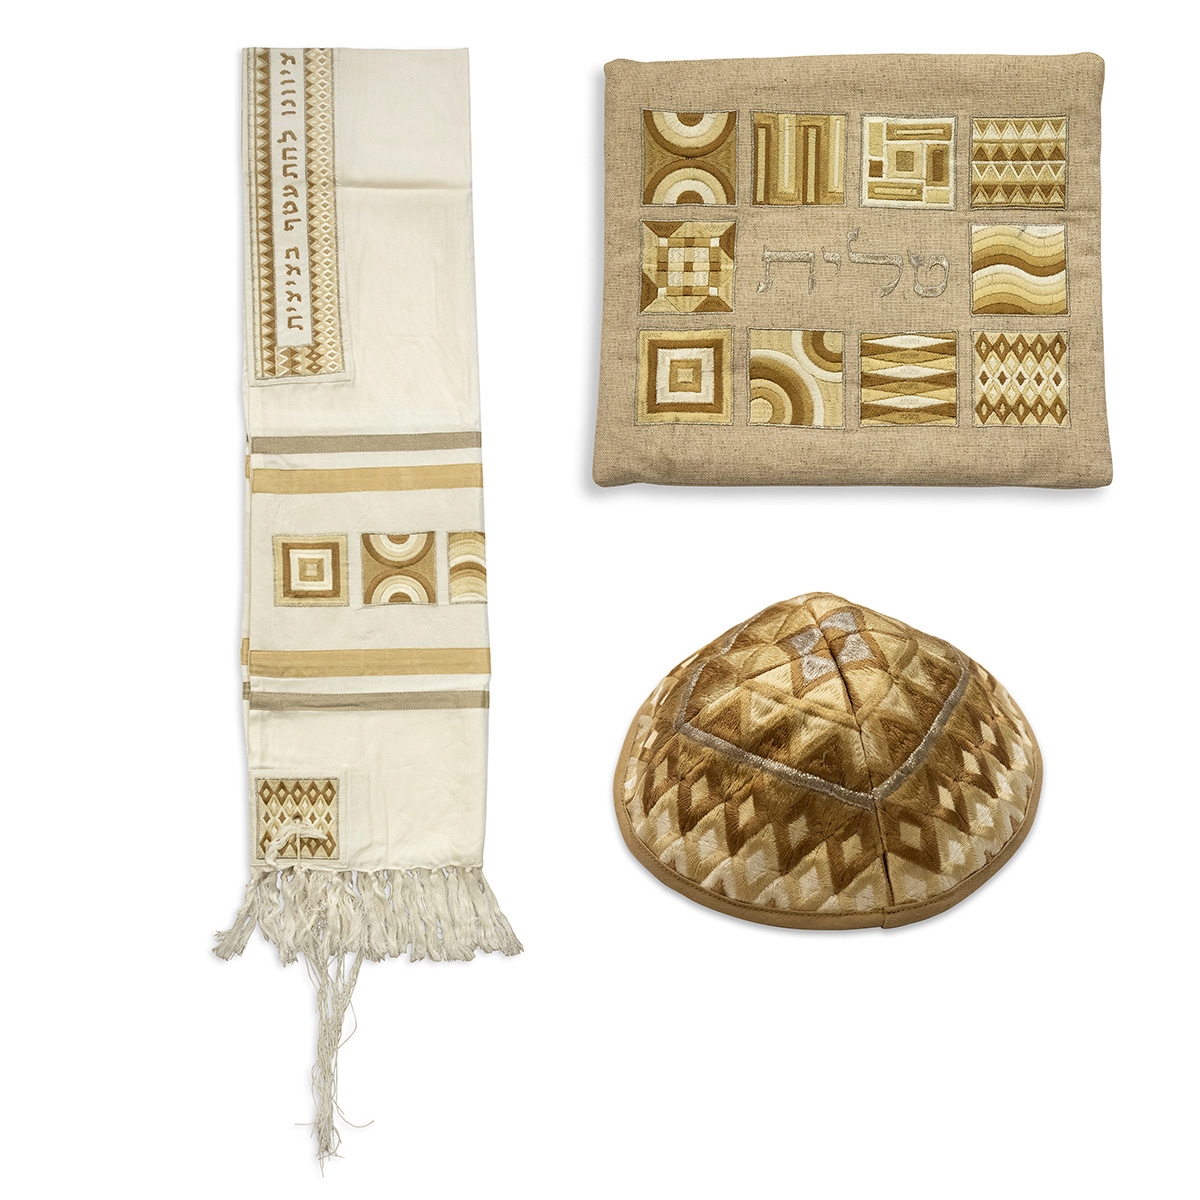 Yair Emanuel Embroidered Prayer Shawl (Tallit) Set With Gold Square Patterns - 1